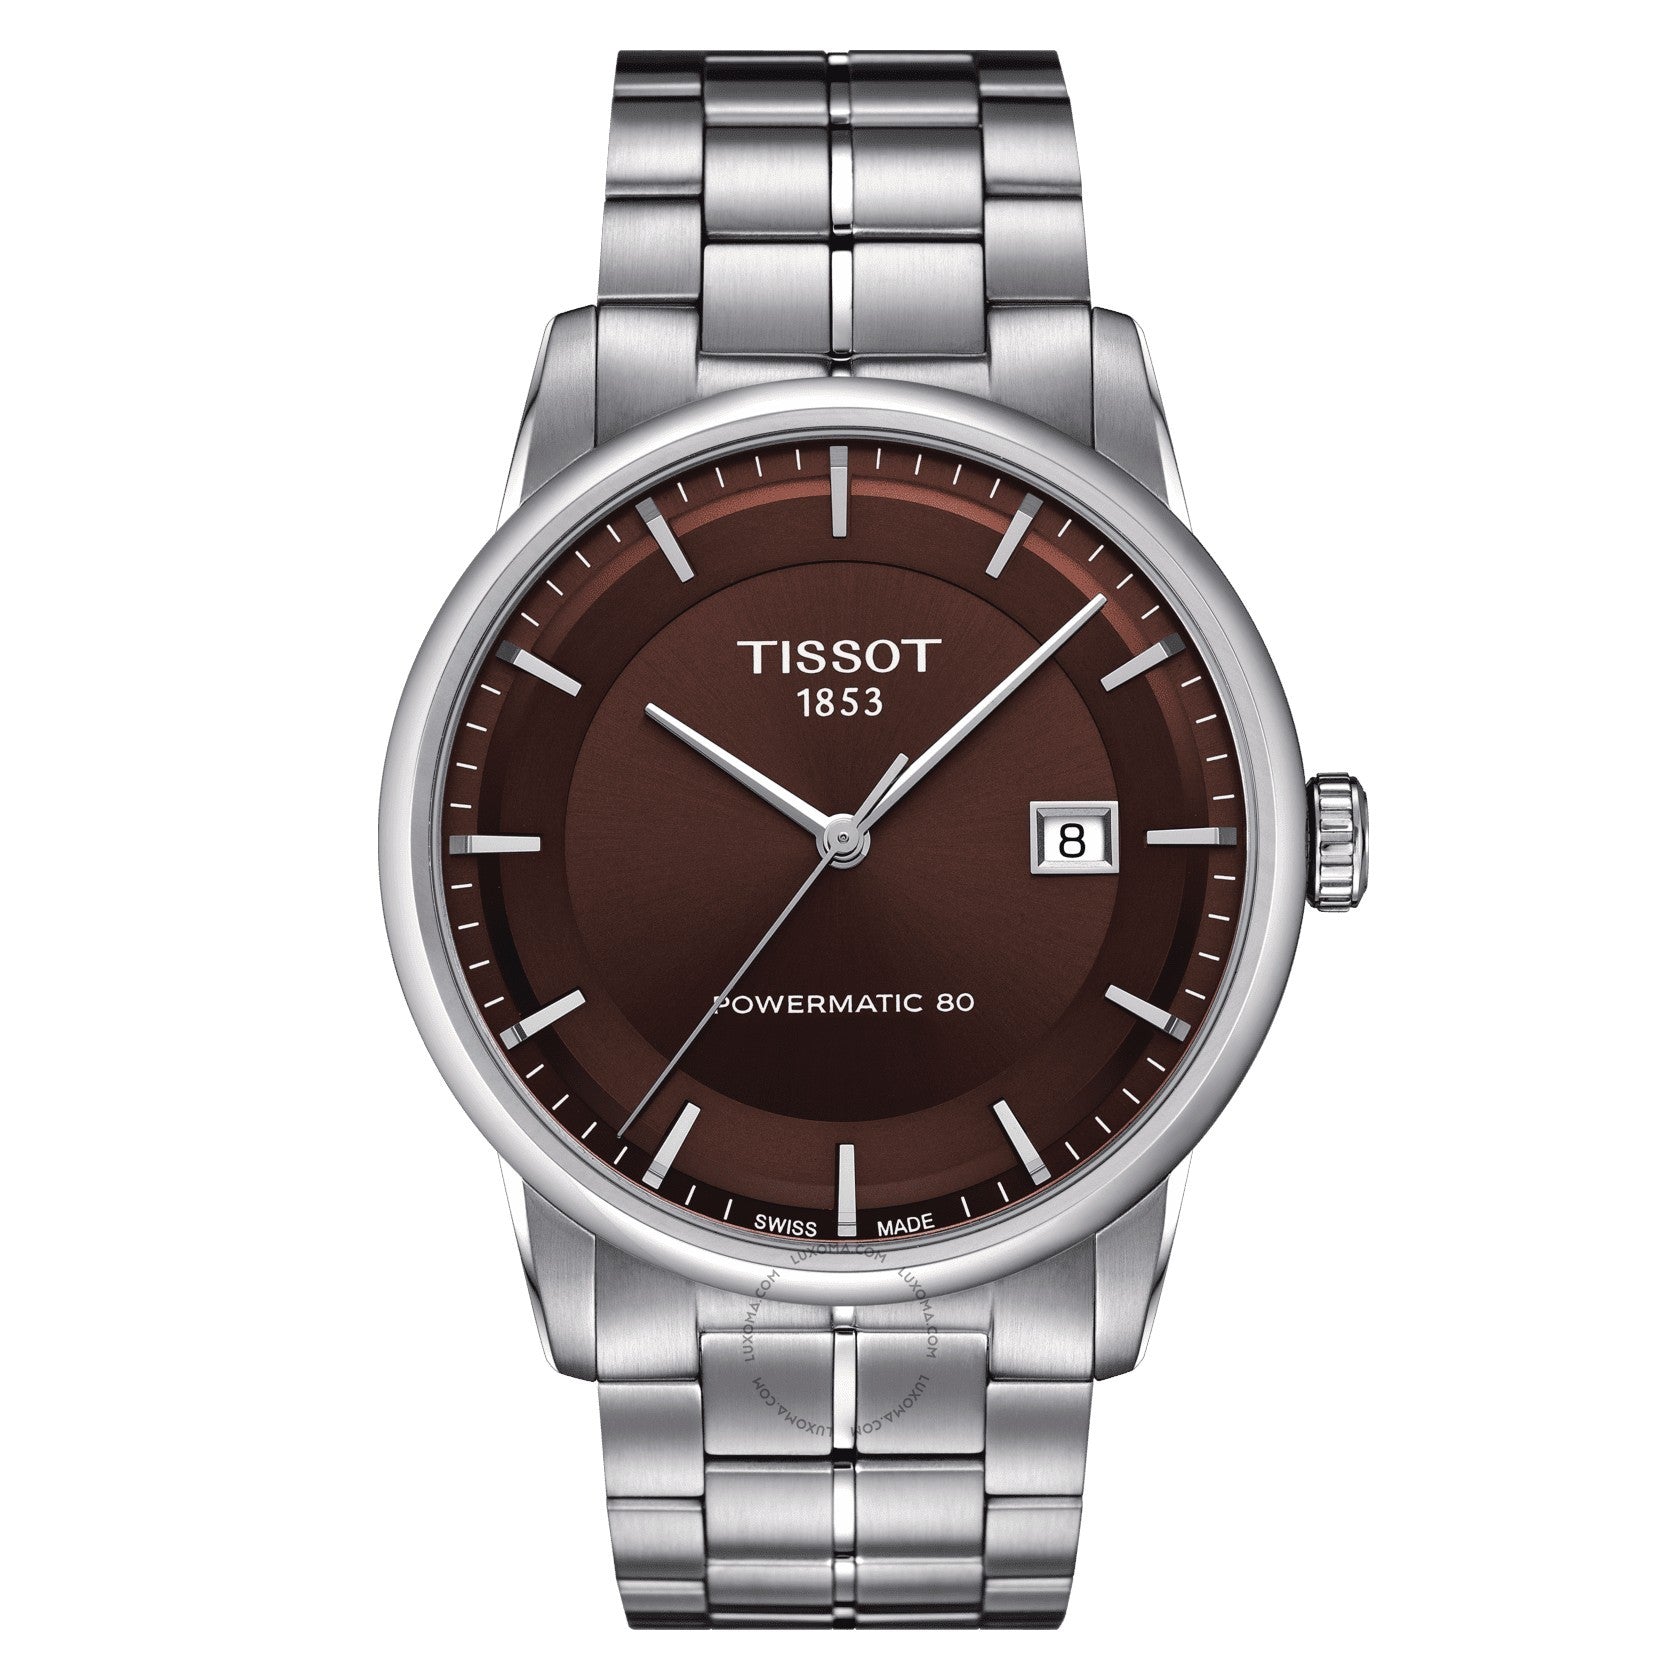 Tissot Luxury Automatic Automatic Brown Dial Men's Watch T086.407.11.291.00